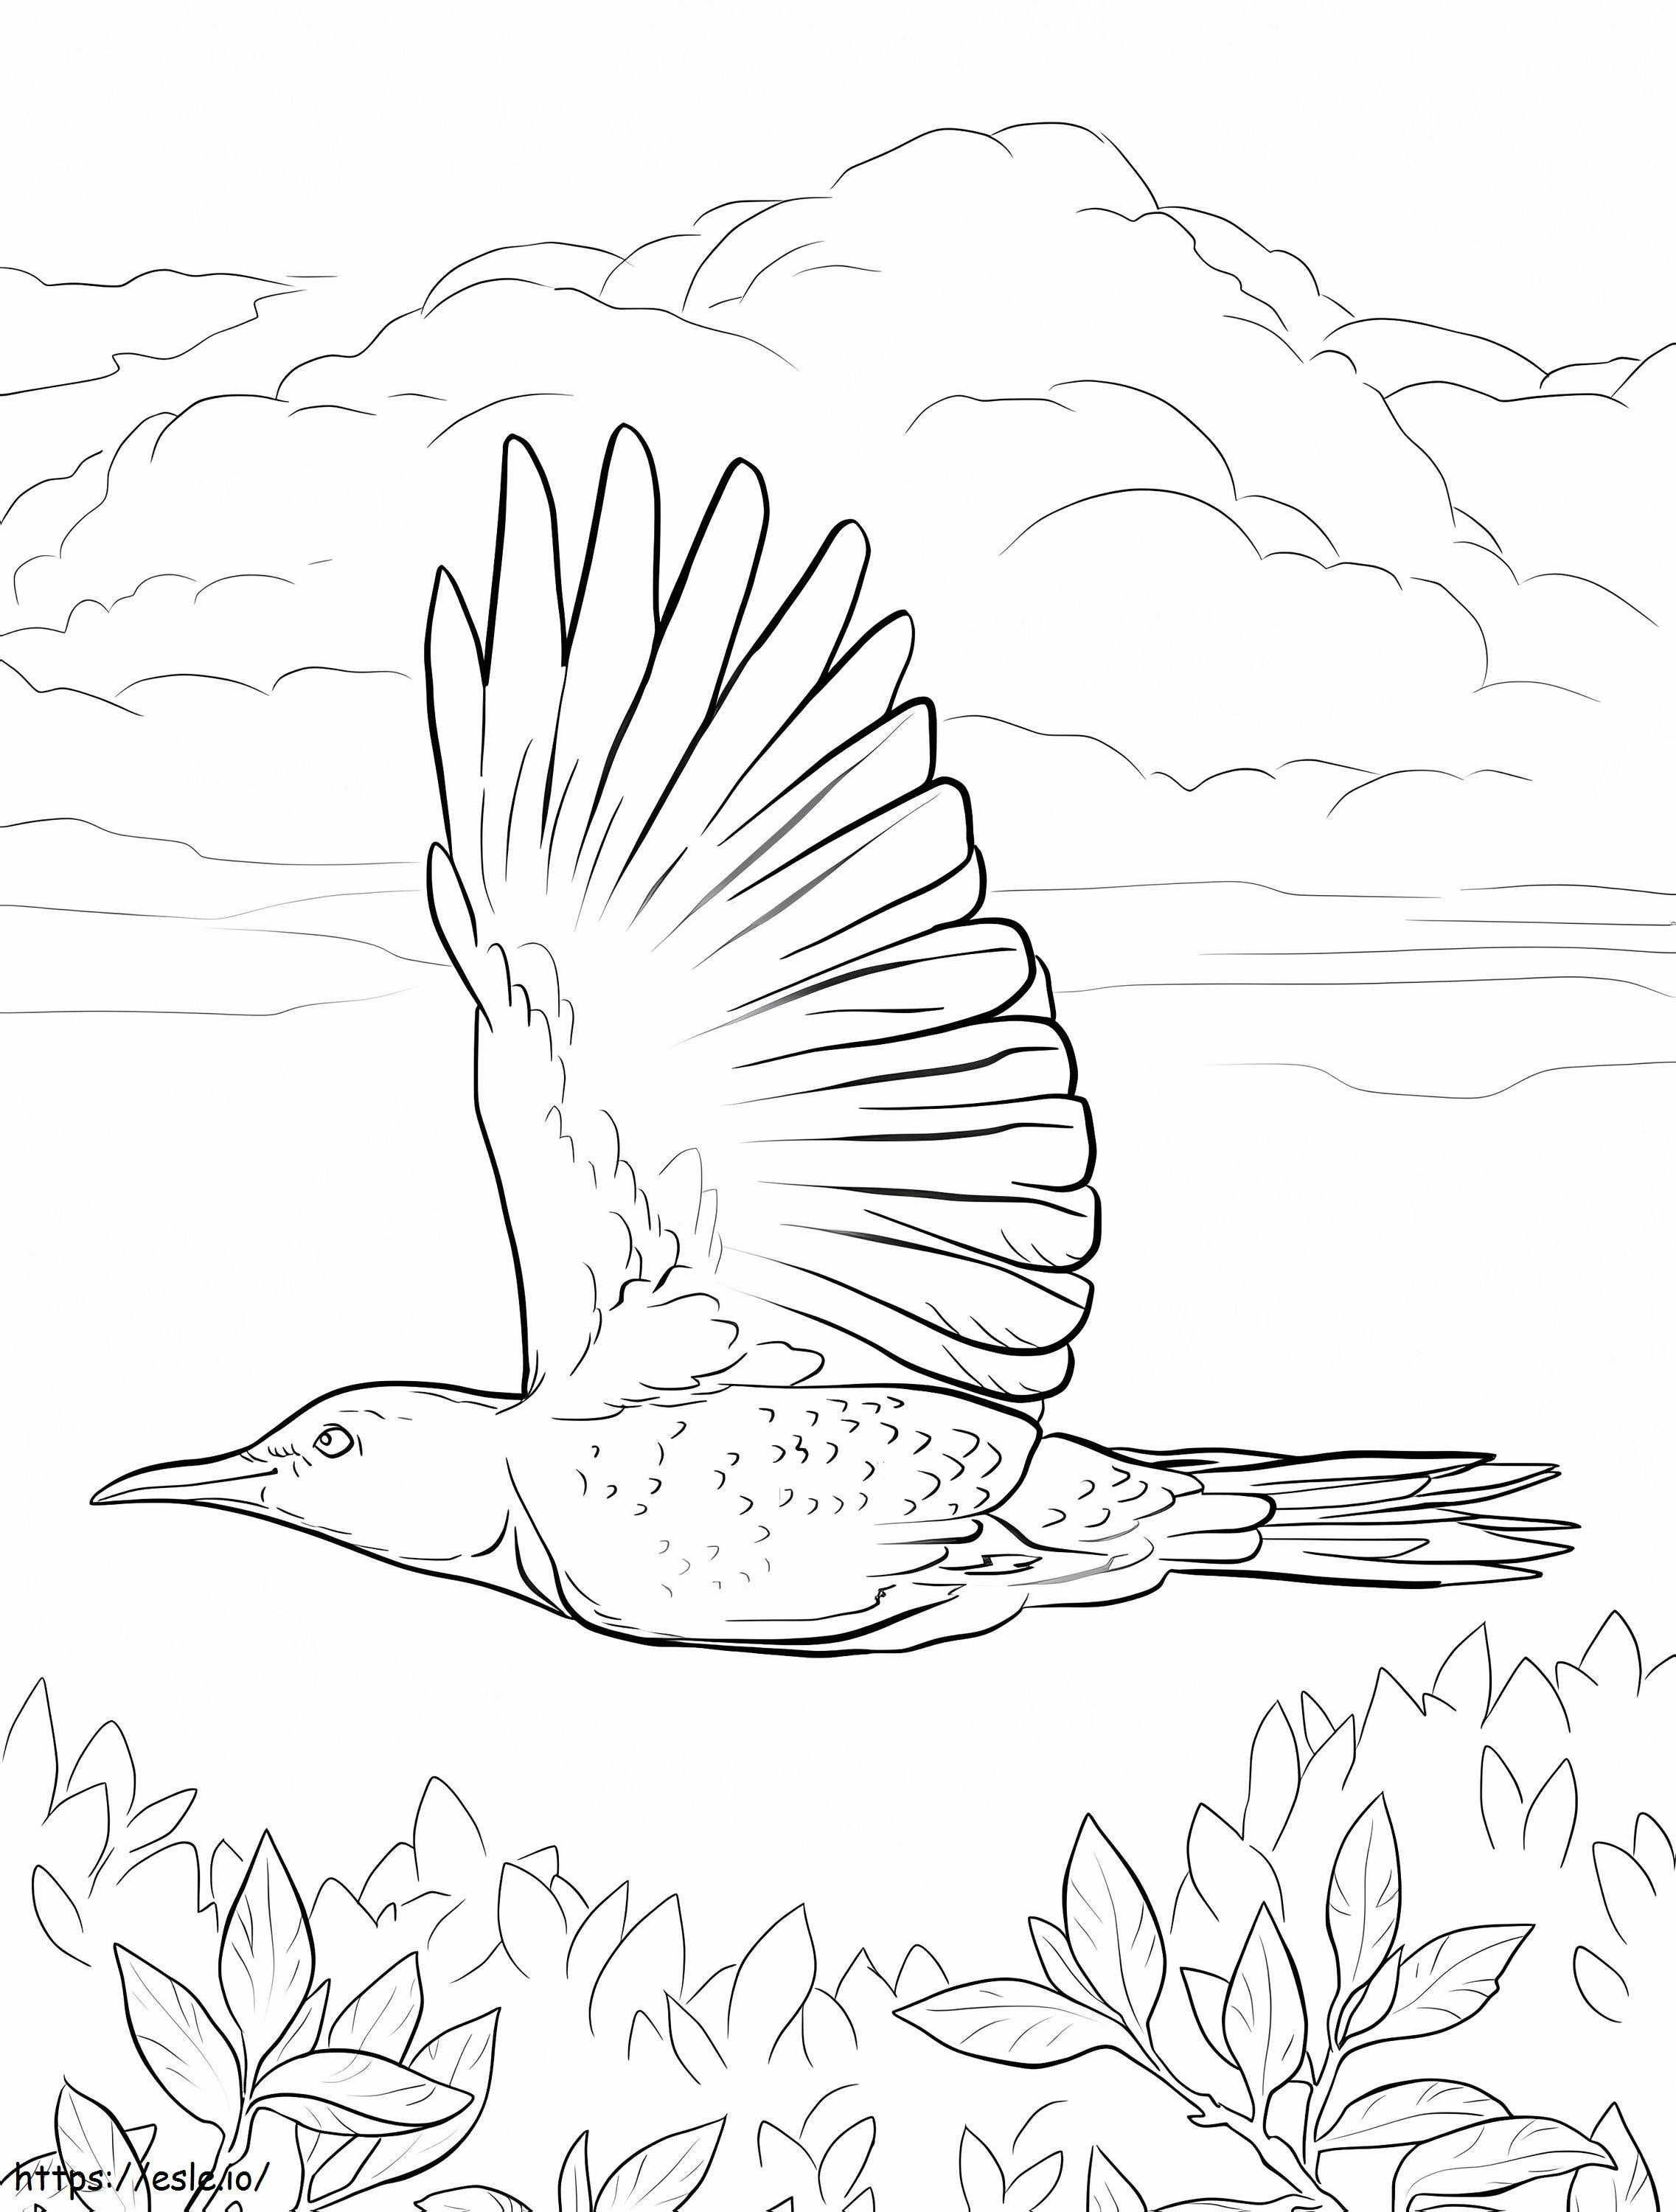 Yellowhammer Woodpecker coloring page